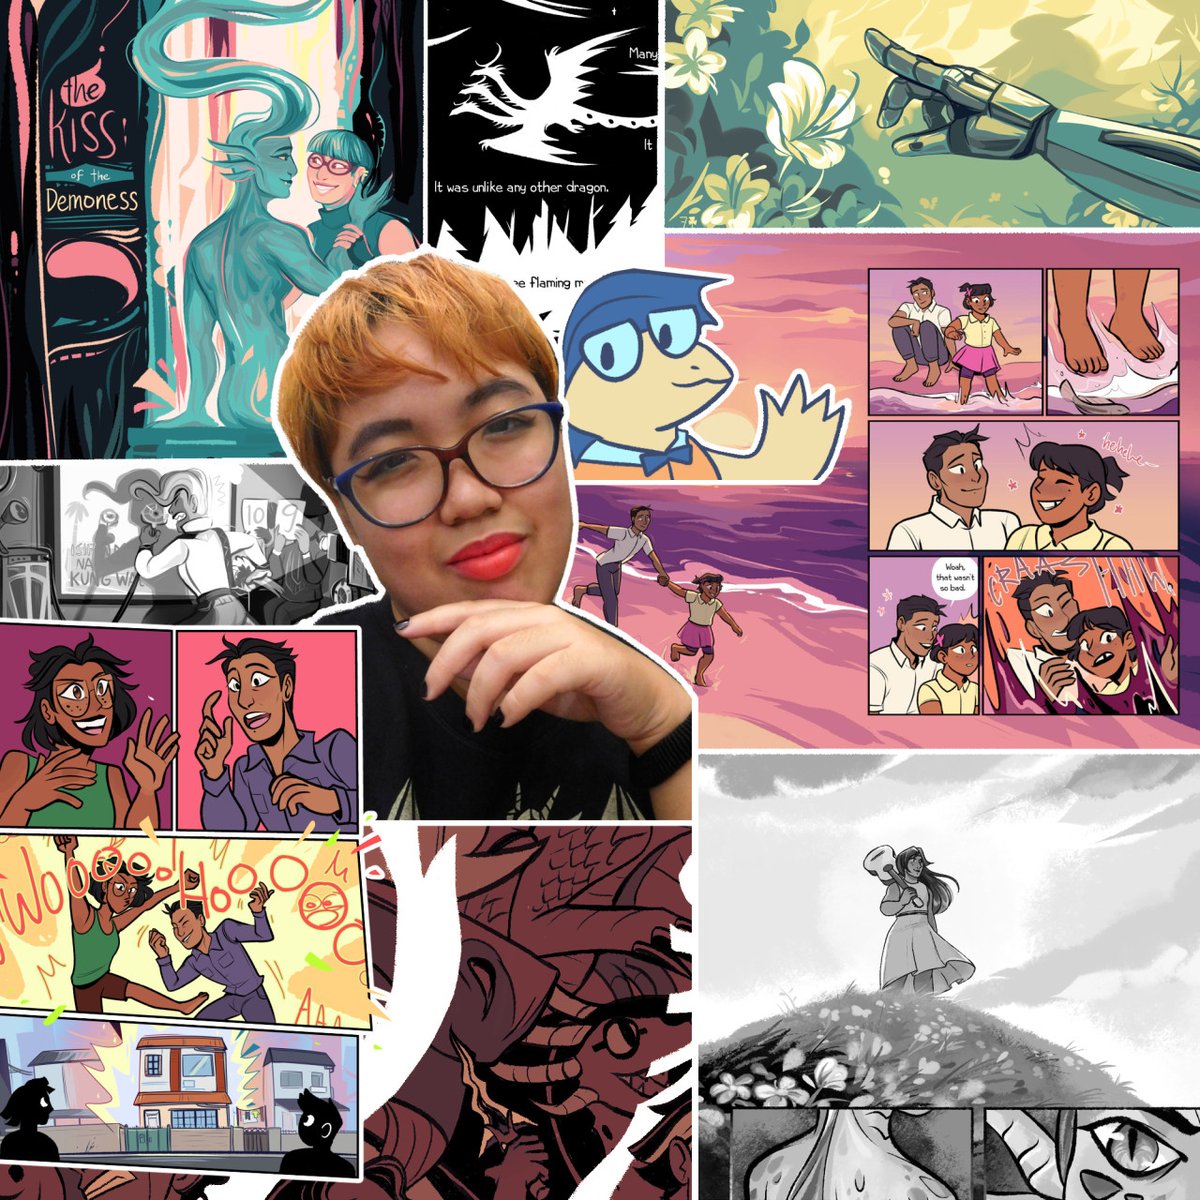 hiya #komiksvskomikeros! I'm 7CLUBS~

I make fandom, LGBT+ and fantasy/contemporary komiks. Current projects are "The Most Important Thing" on Penlab and codename "Dragoncomic" that I'll be unveiling soon! :} 